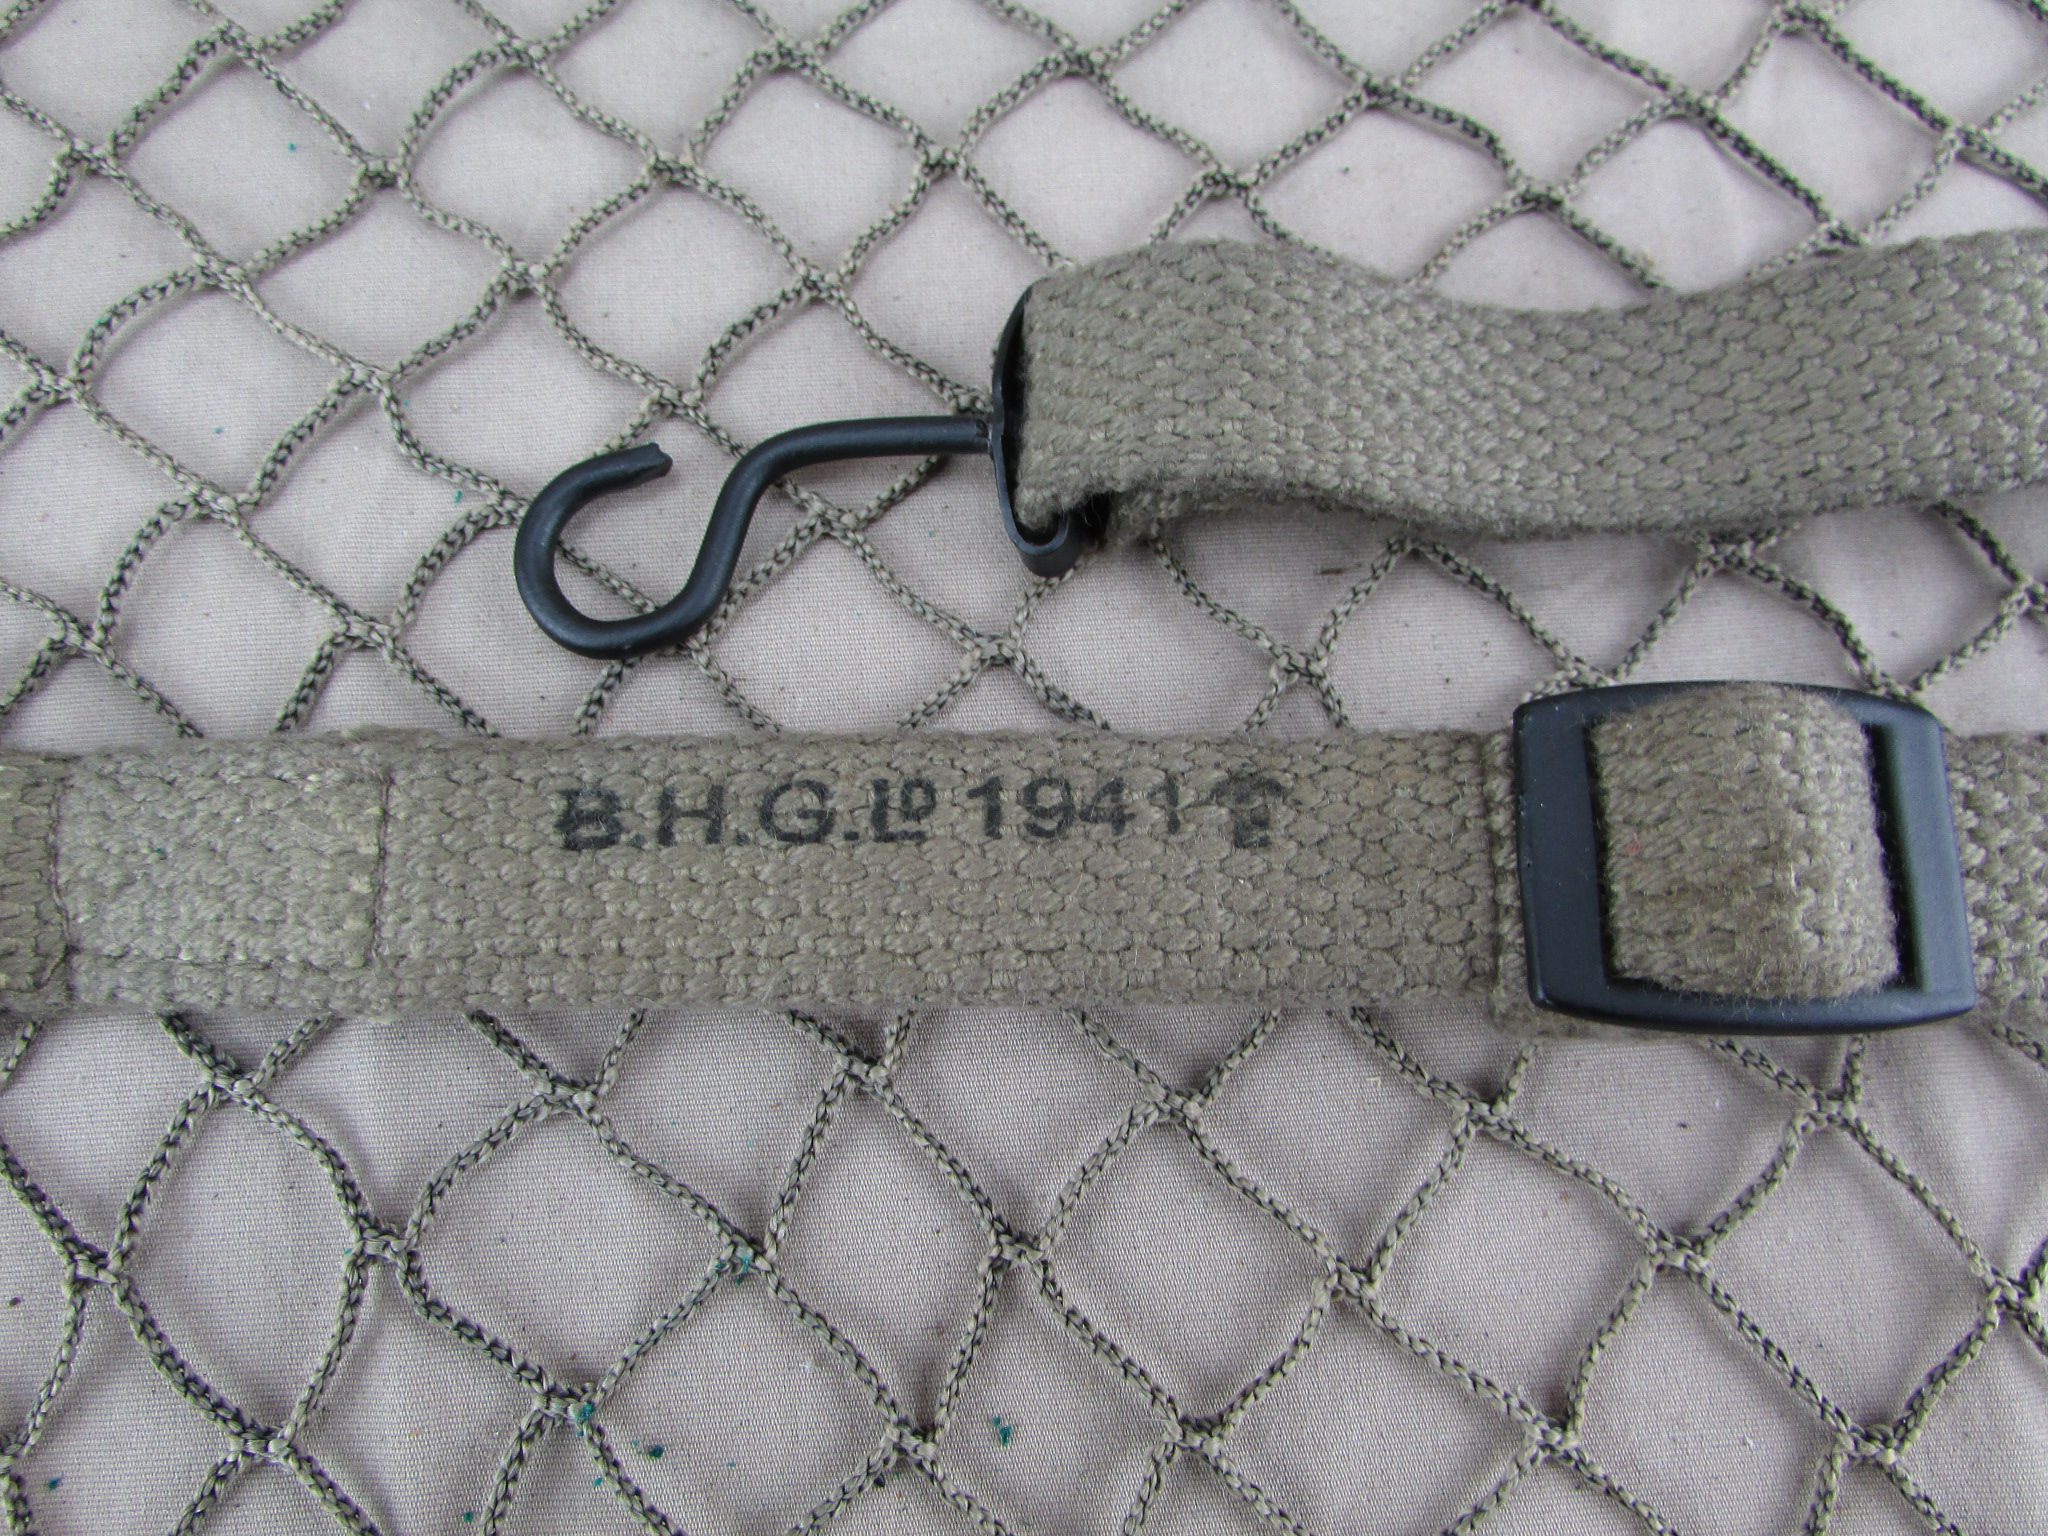 British Sten sling marked BHGL 1941 reproduction? | St. Croix Military ...